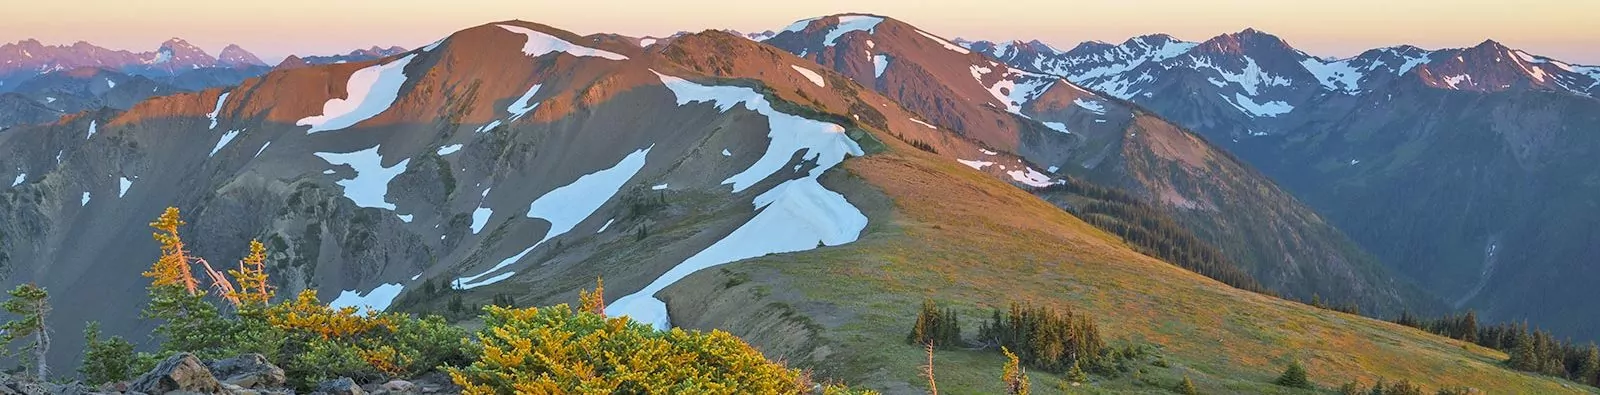 Olympic National Park Backpacking Treks & Tours